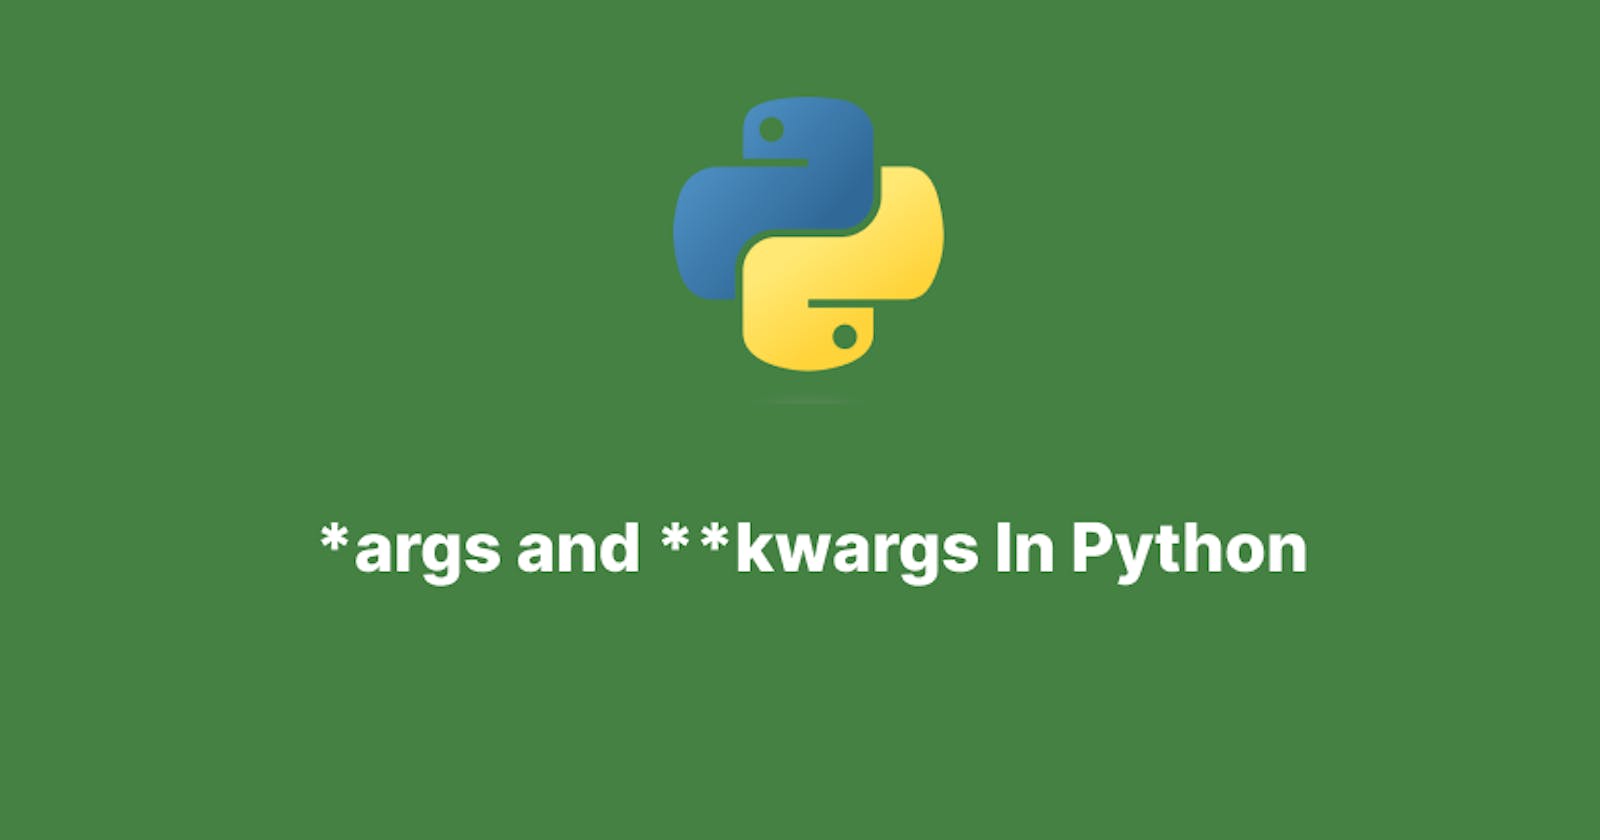 *args and **kwargs in Python